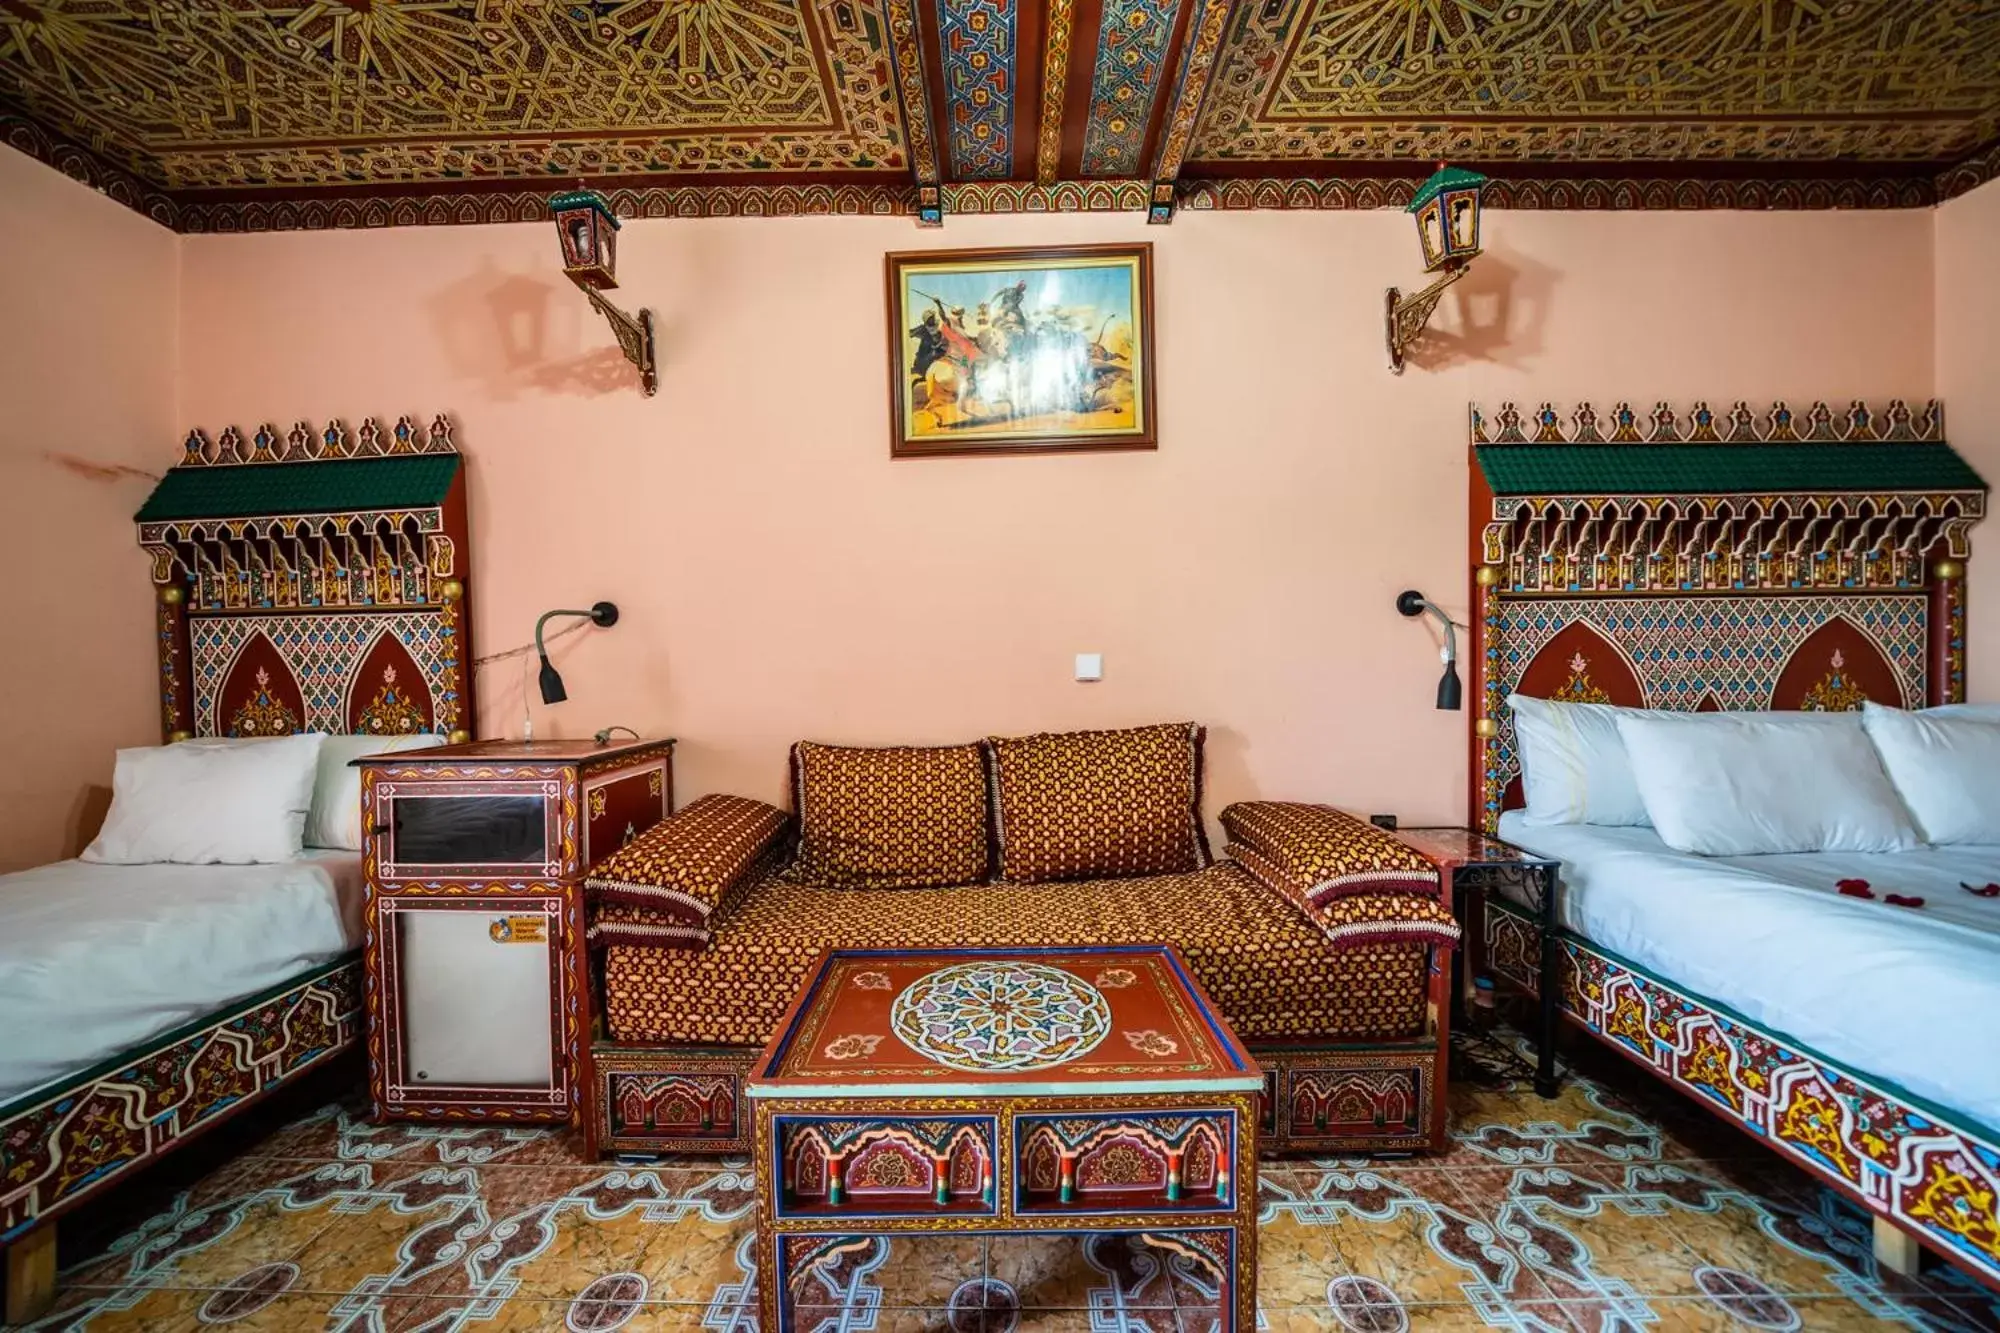 Decorative detail, Seating Area in Moroccan House